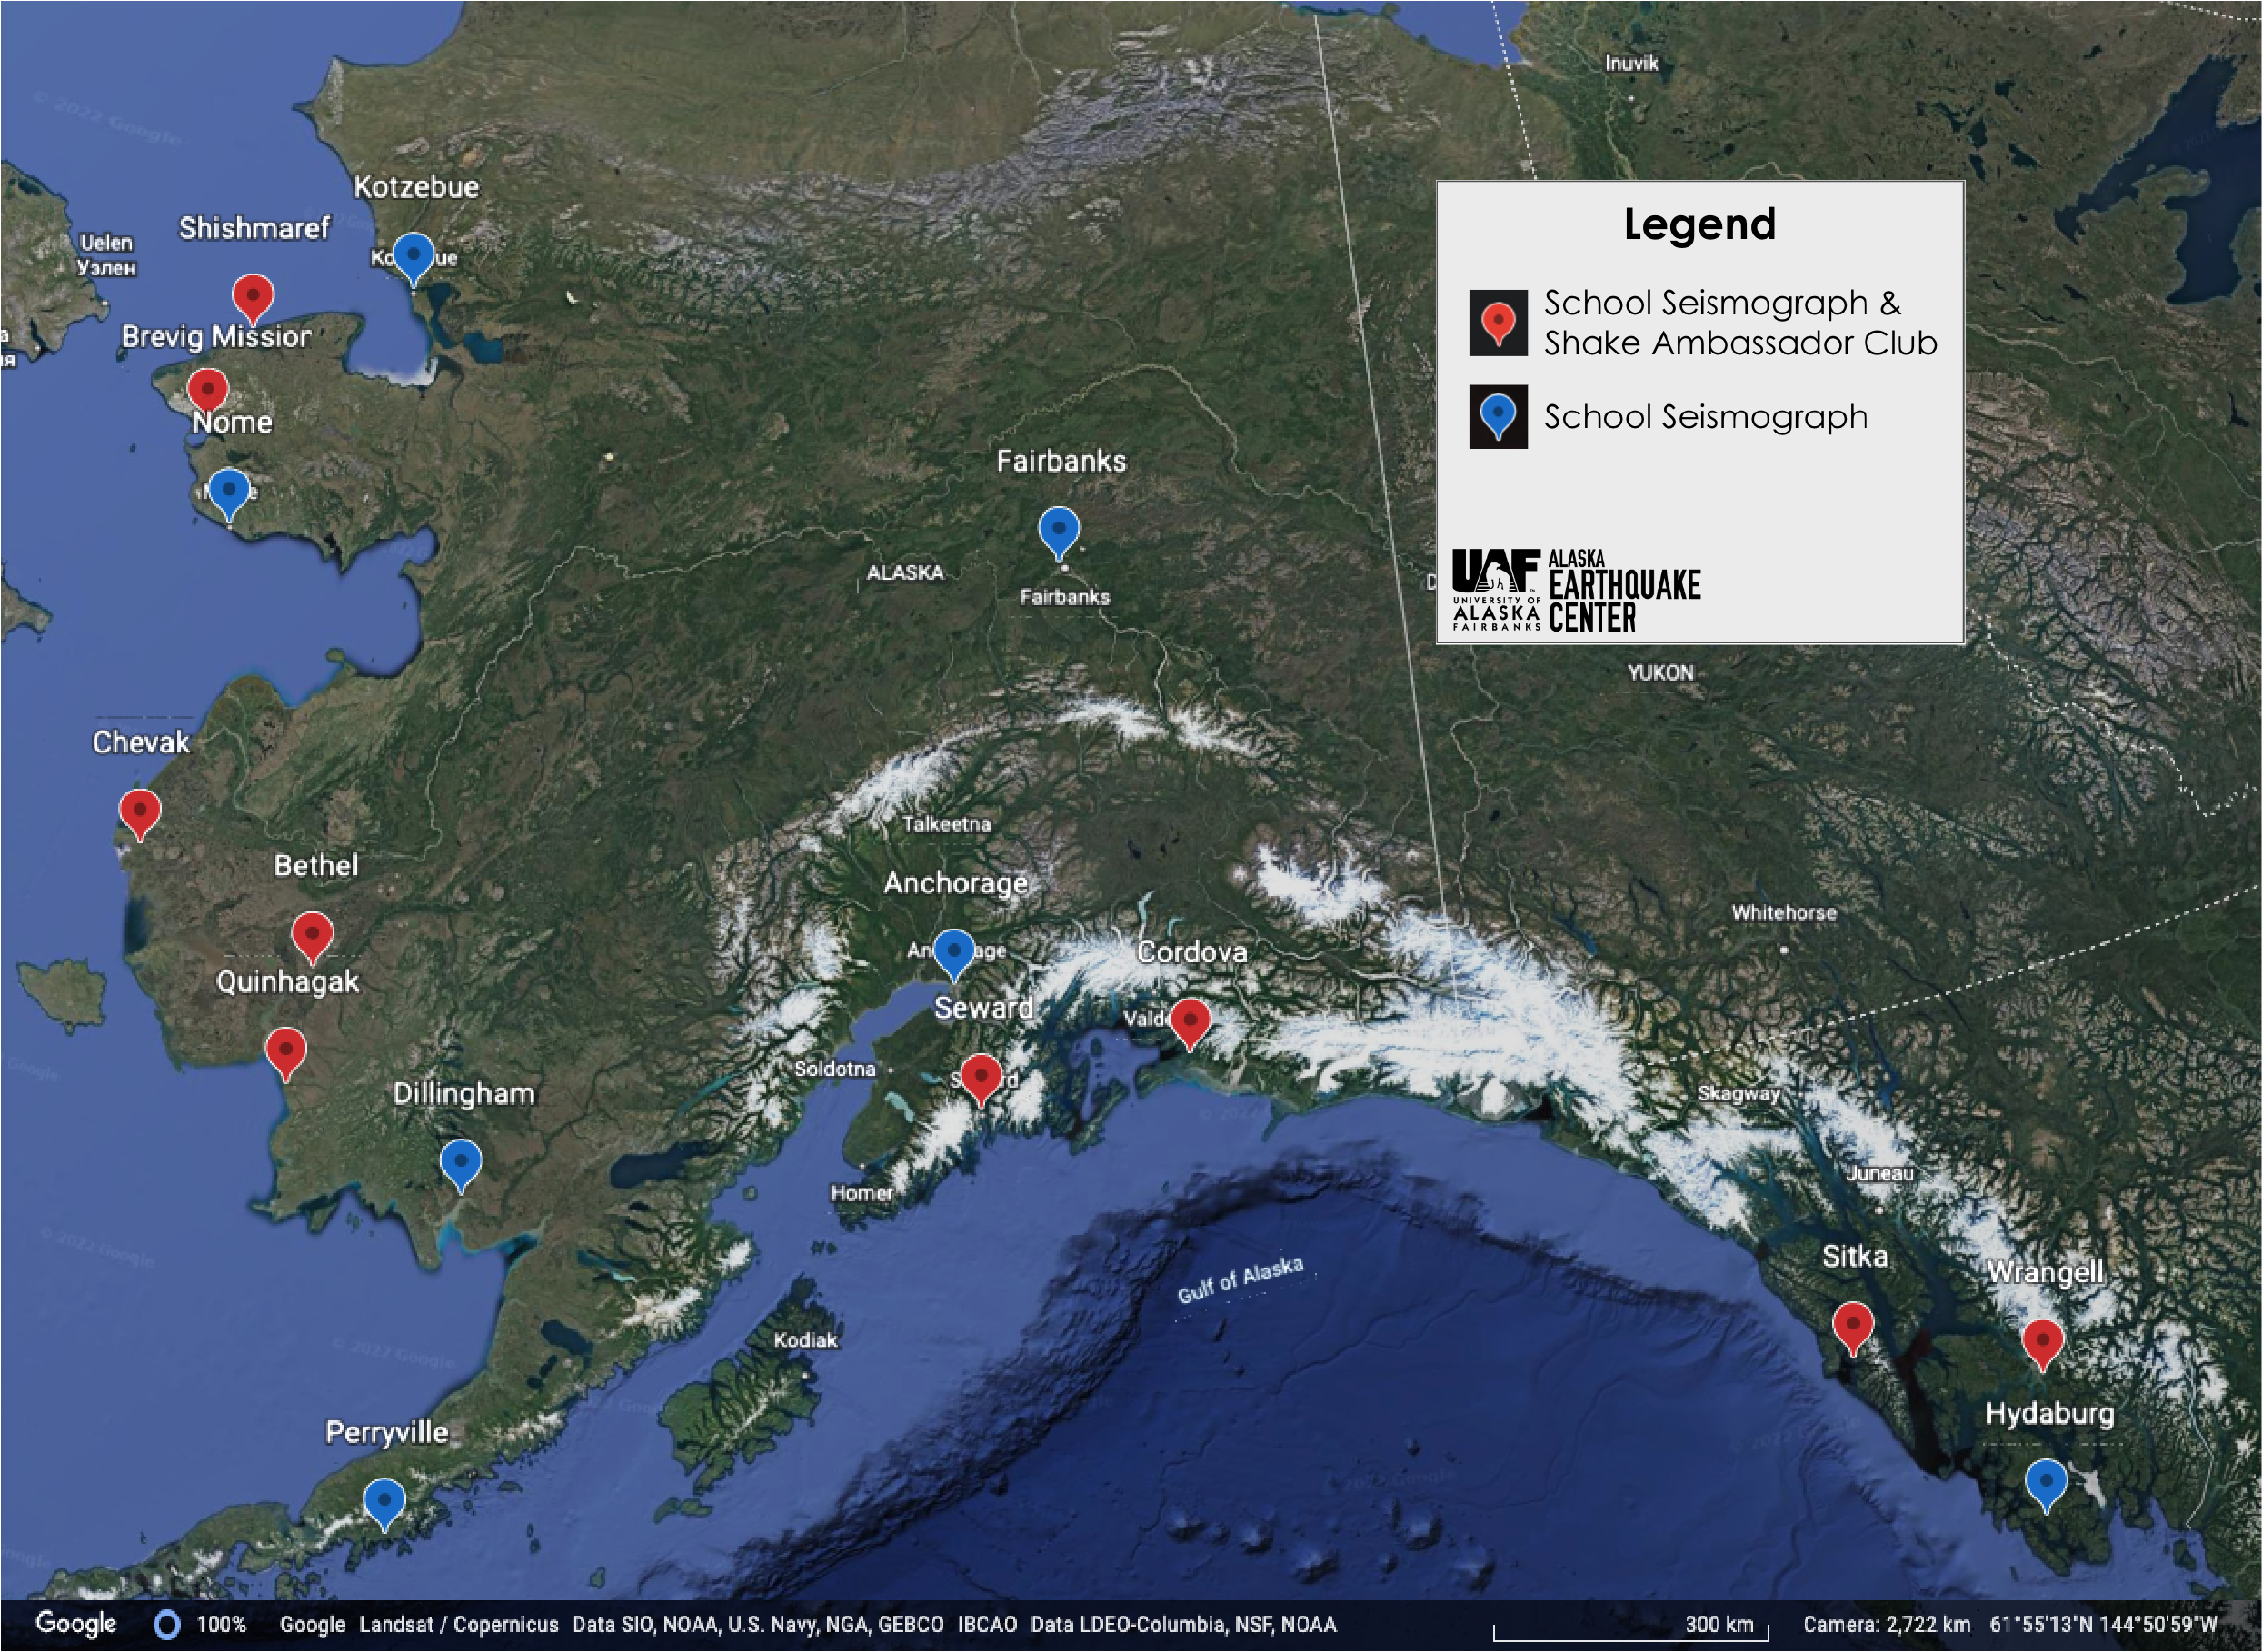 Map of Alaska showing locations of 16 schools participating in the Seismology in Schools program.